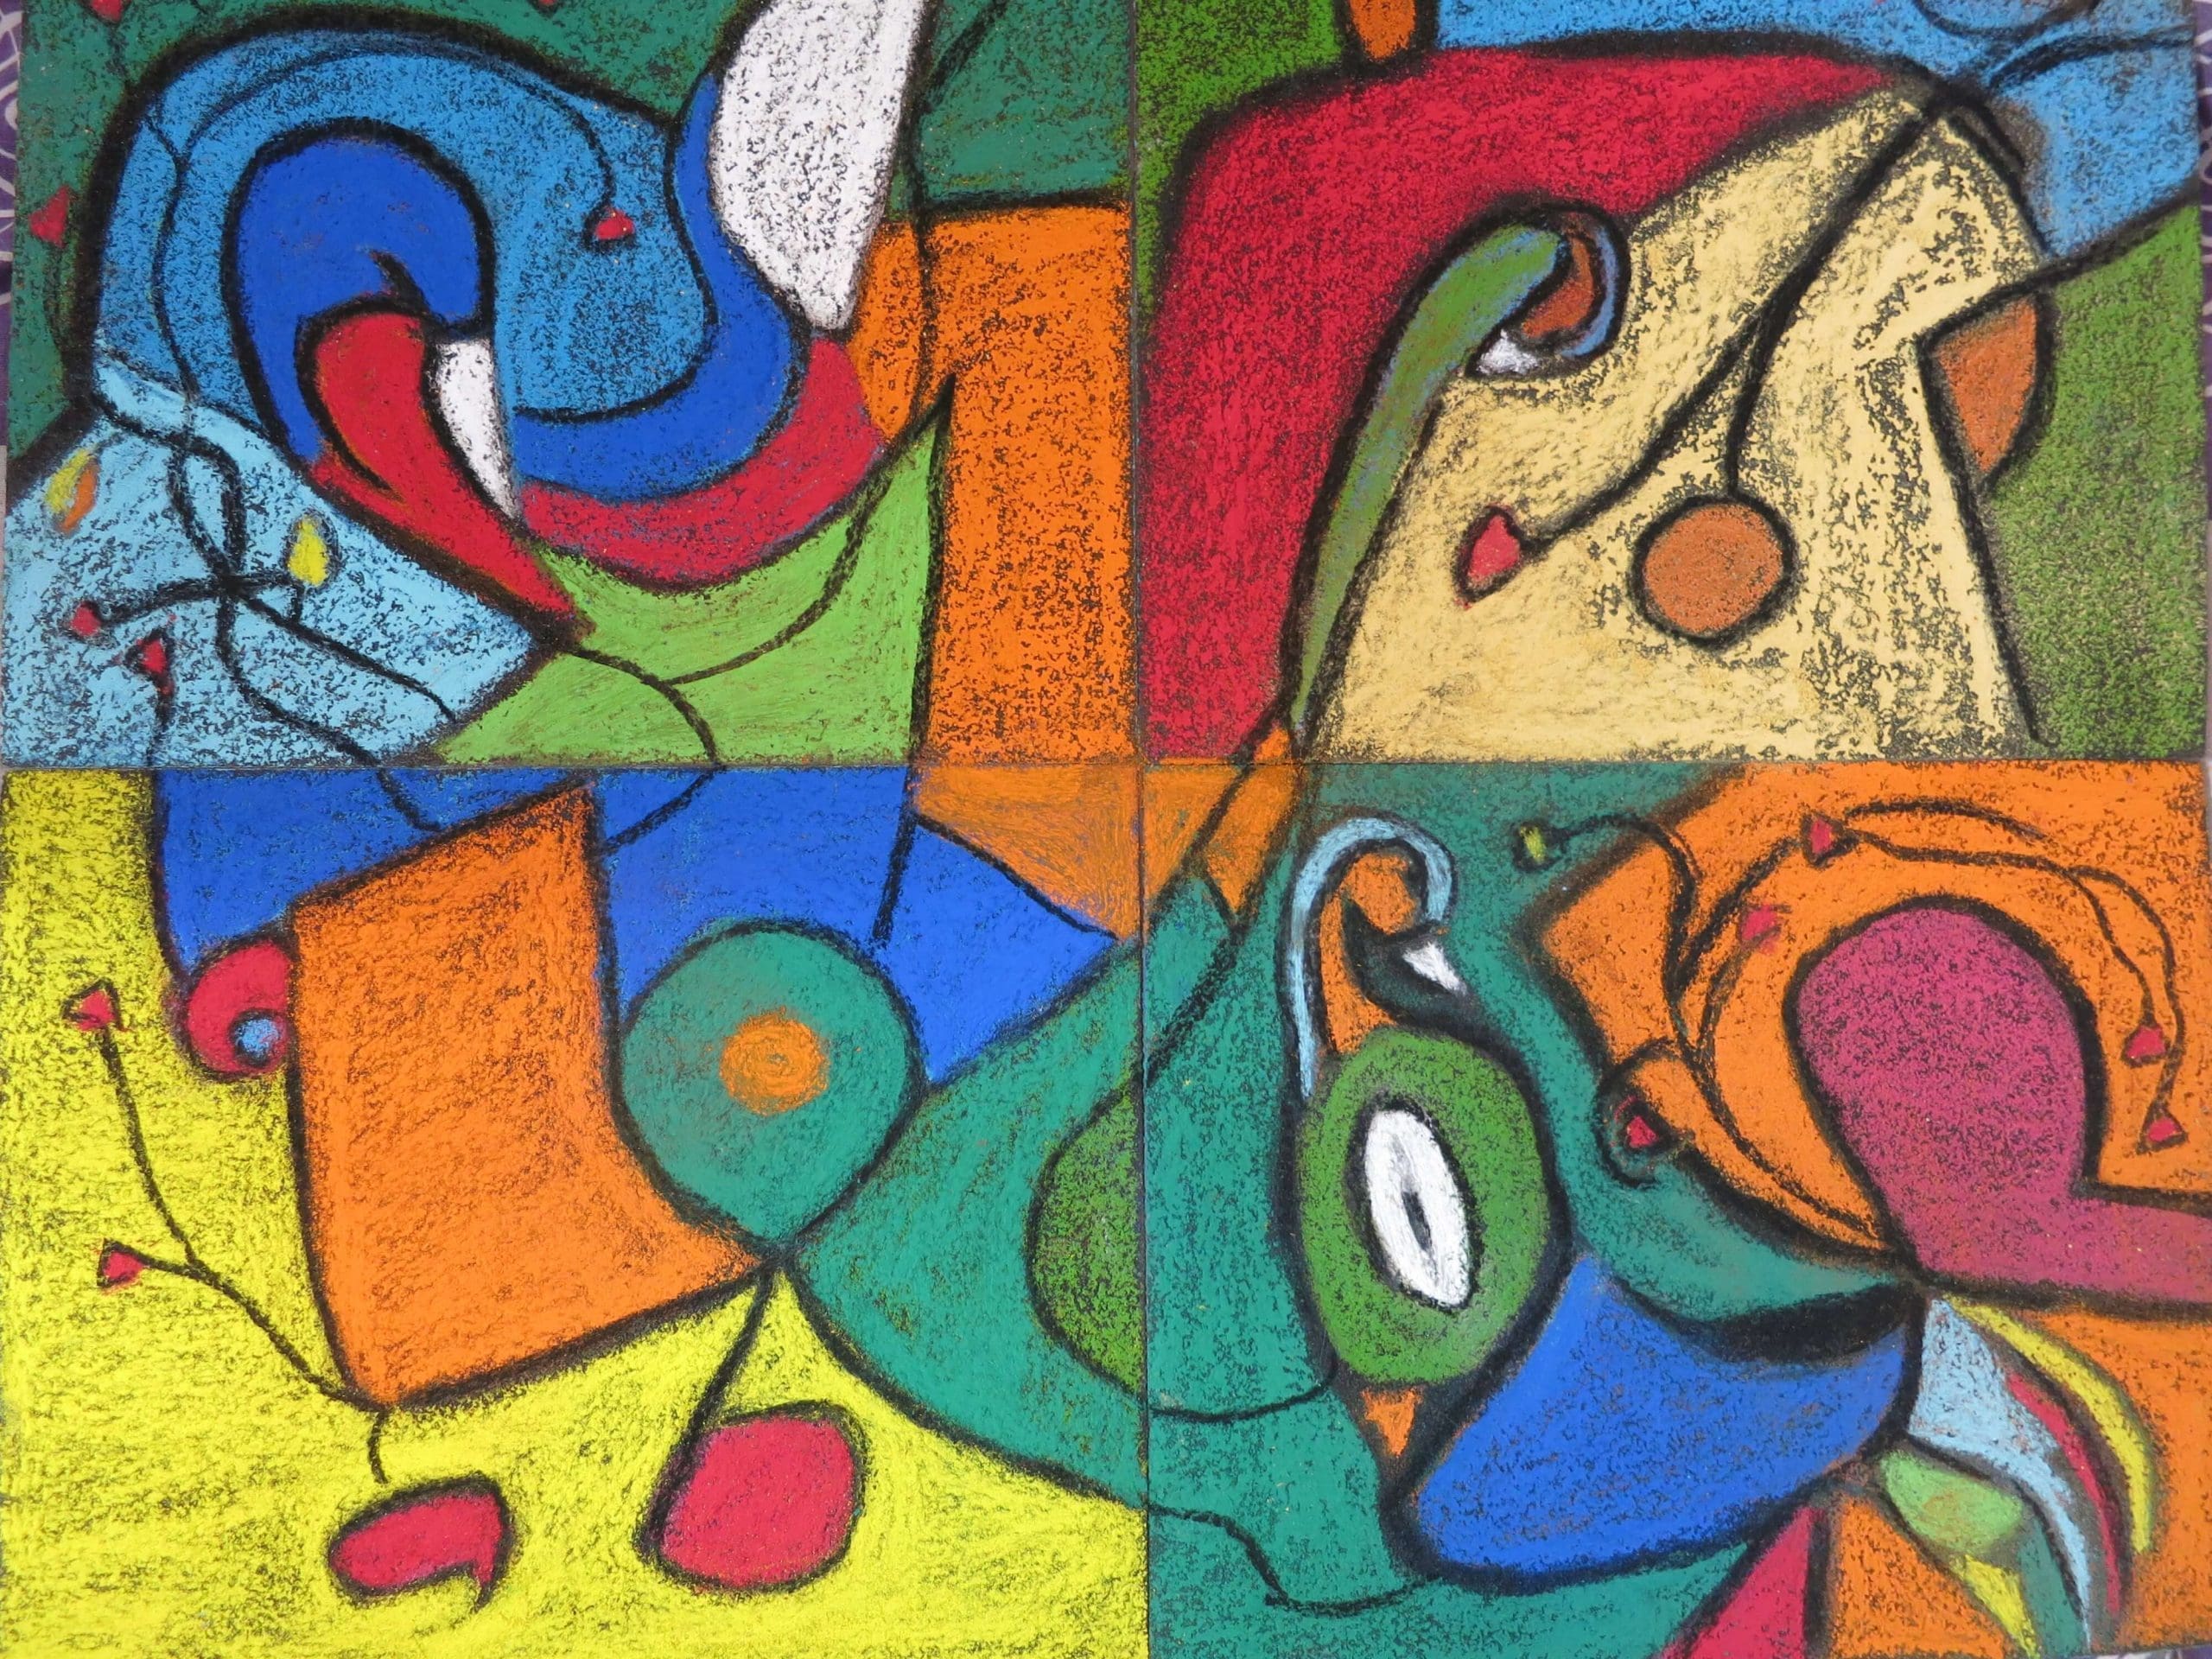 Child painting in cubist, abstract style by Ronia Khalaj.